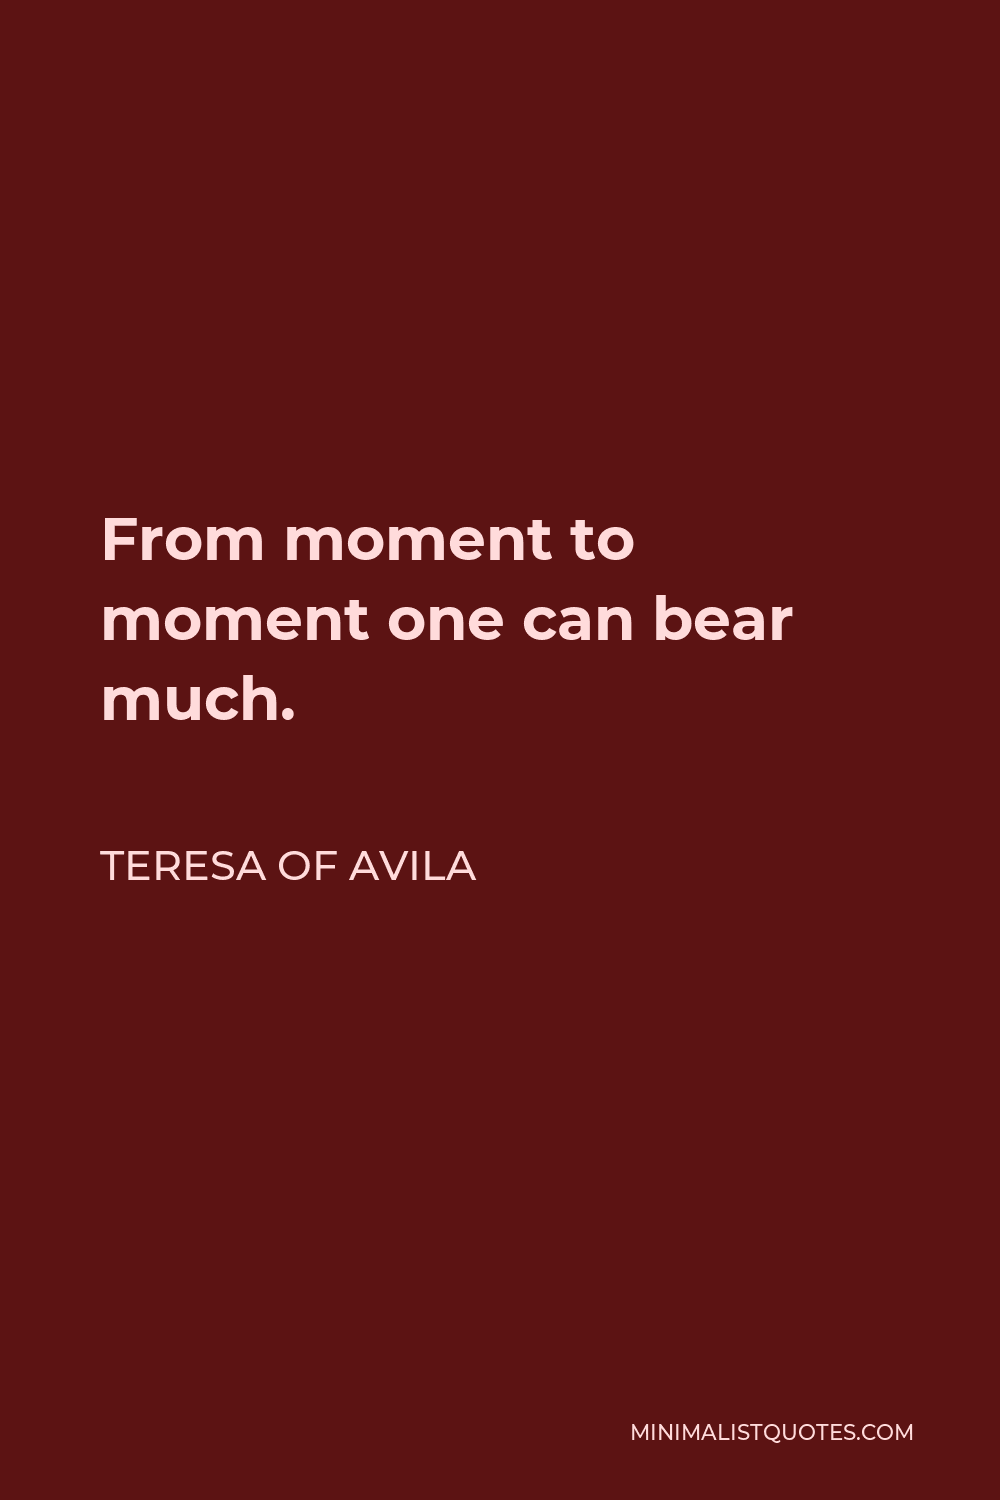 Teresa of Avila Quote - From moment to moment one can bear much.